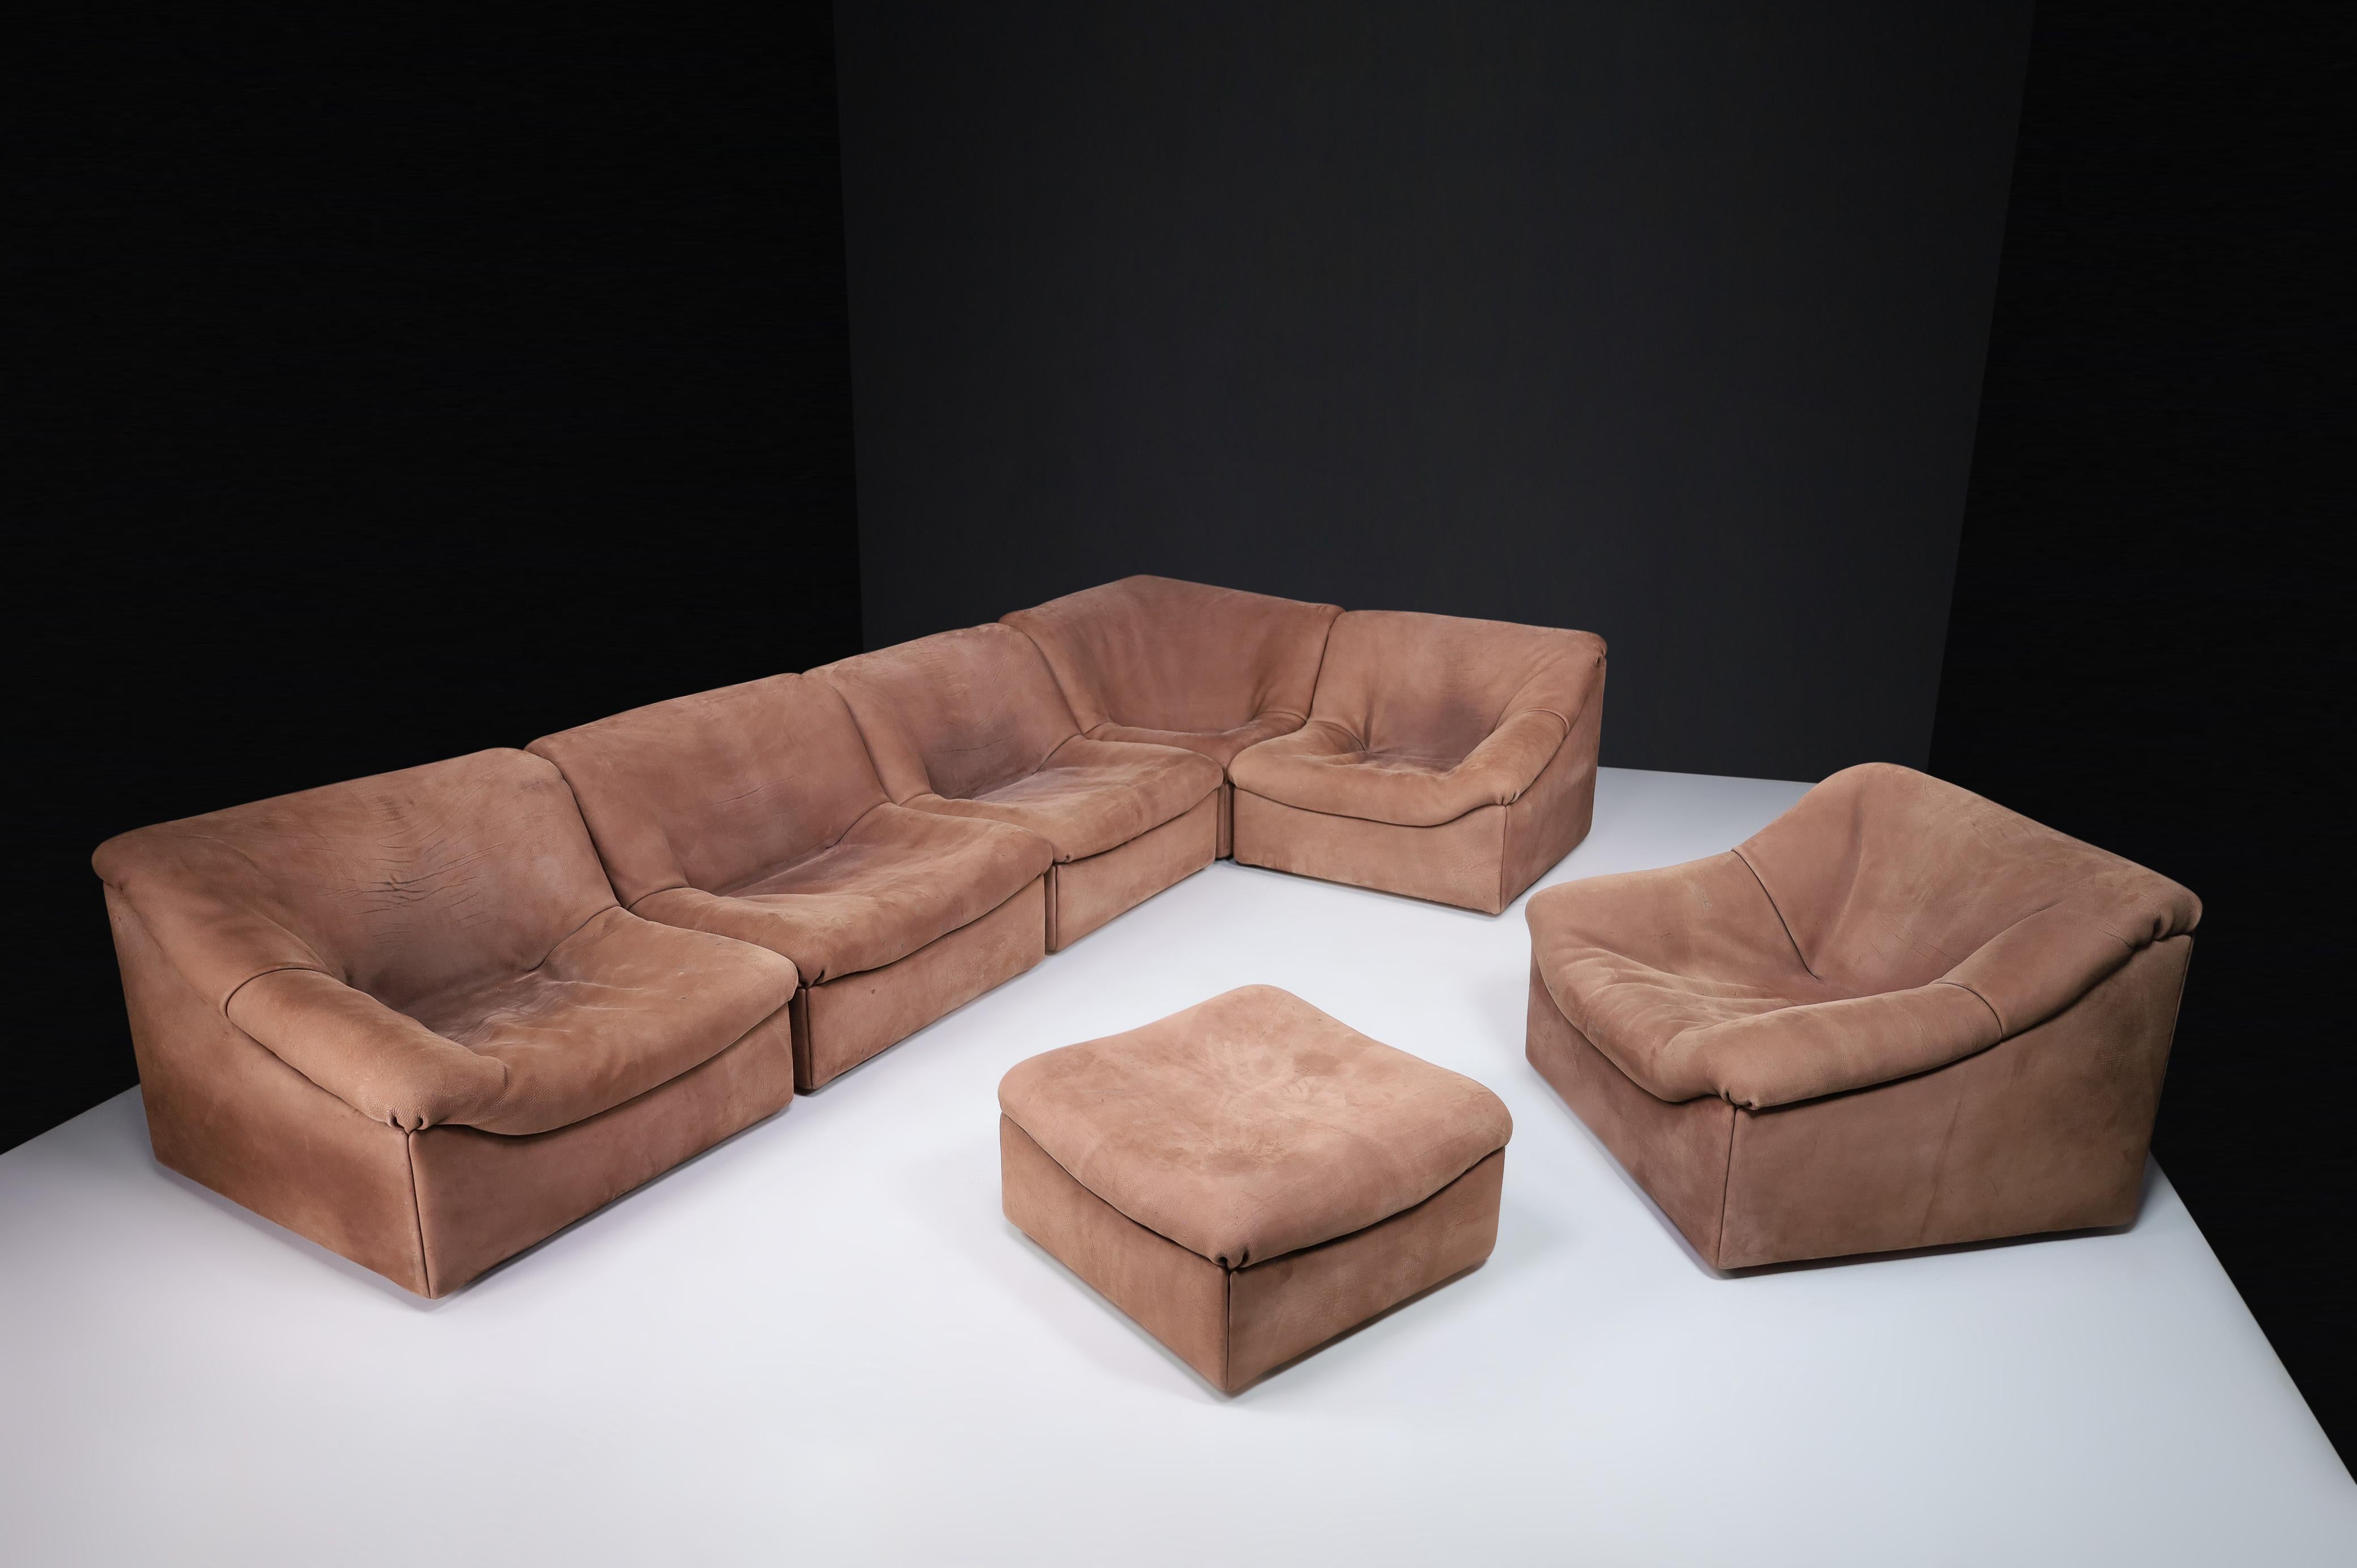 De Sede DS46 Sectional Sofa-Livingroomset in Strong Buffalo Leather, Switzerland 1970s

Original De Sede DS 46 designer leather corner sofa, chair, and ottoman in Minimalist and modern design, with practical modular function, made for pure comfort